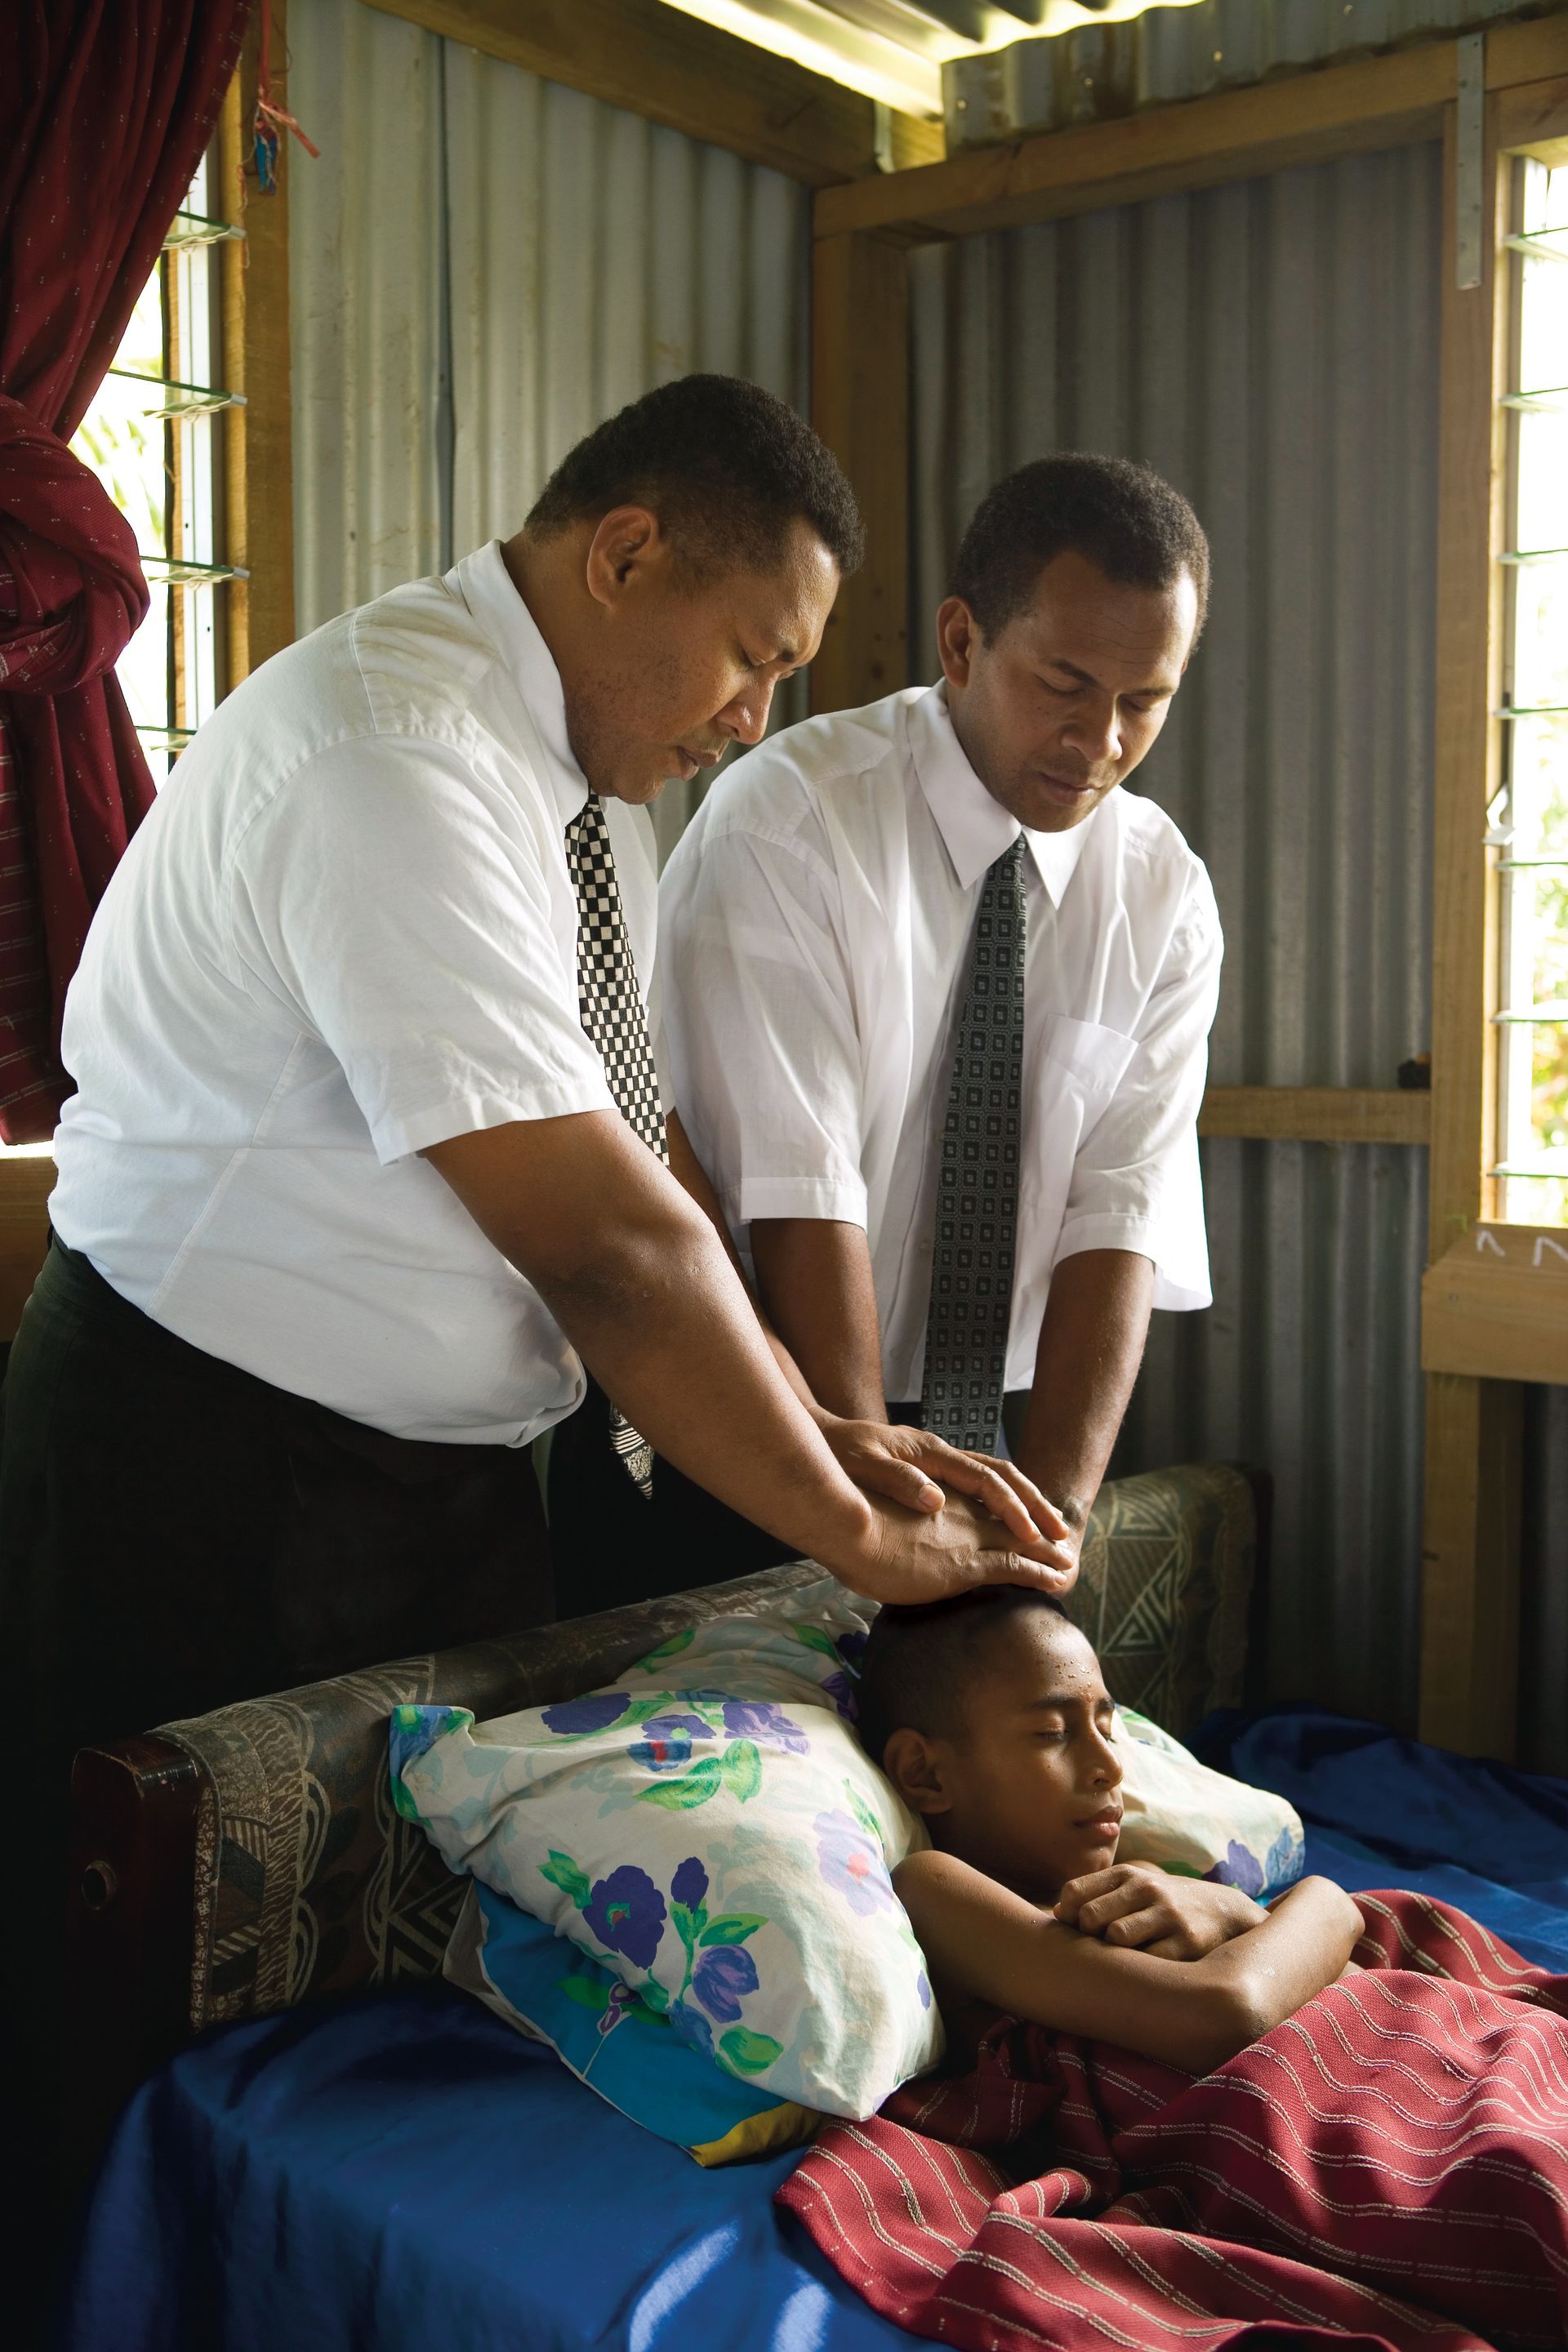 Two men give a priesthood blessing to a young boy who is sick.